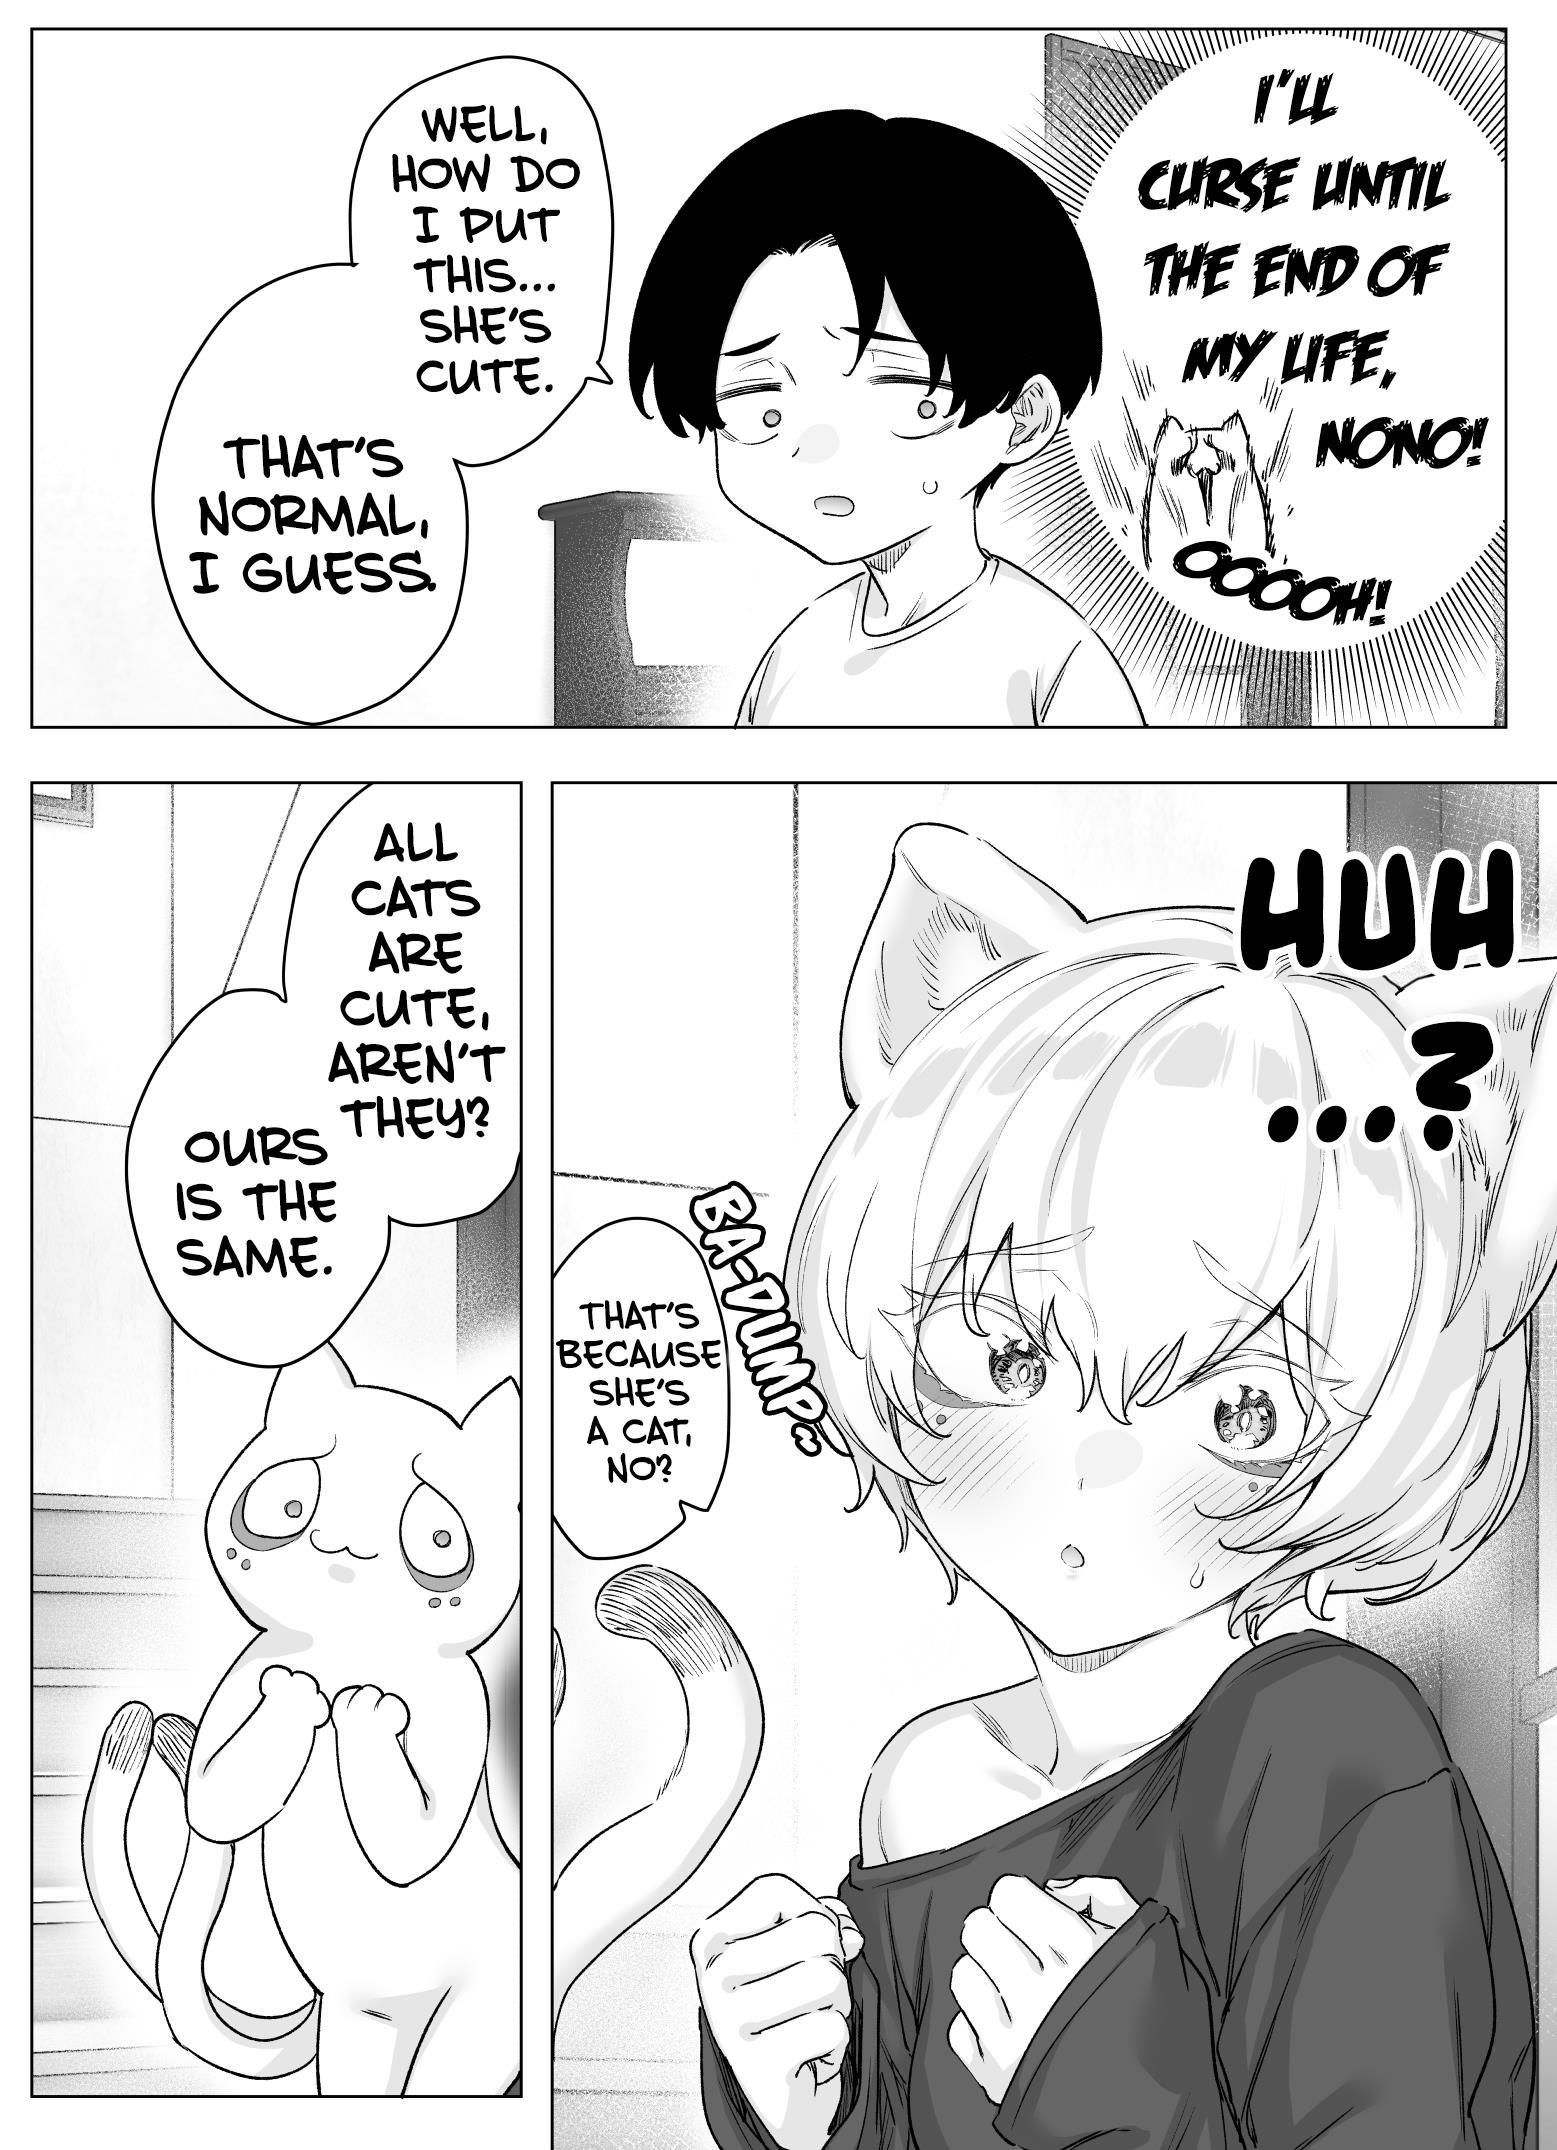 Even Though She's The Losing Heroine, The Bakeneko-Chan Remains Undaunted Chapter 12: Bakeneko-Chan, The Losing Heroine - Picture 2